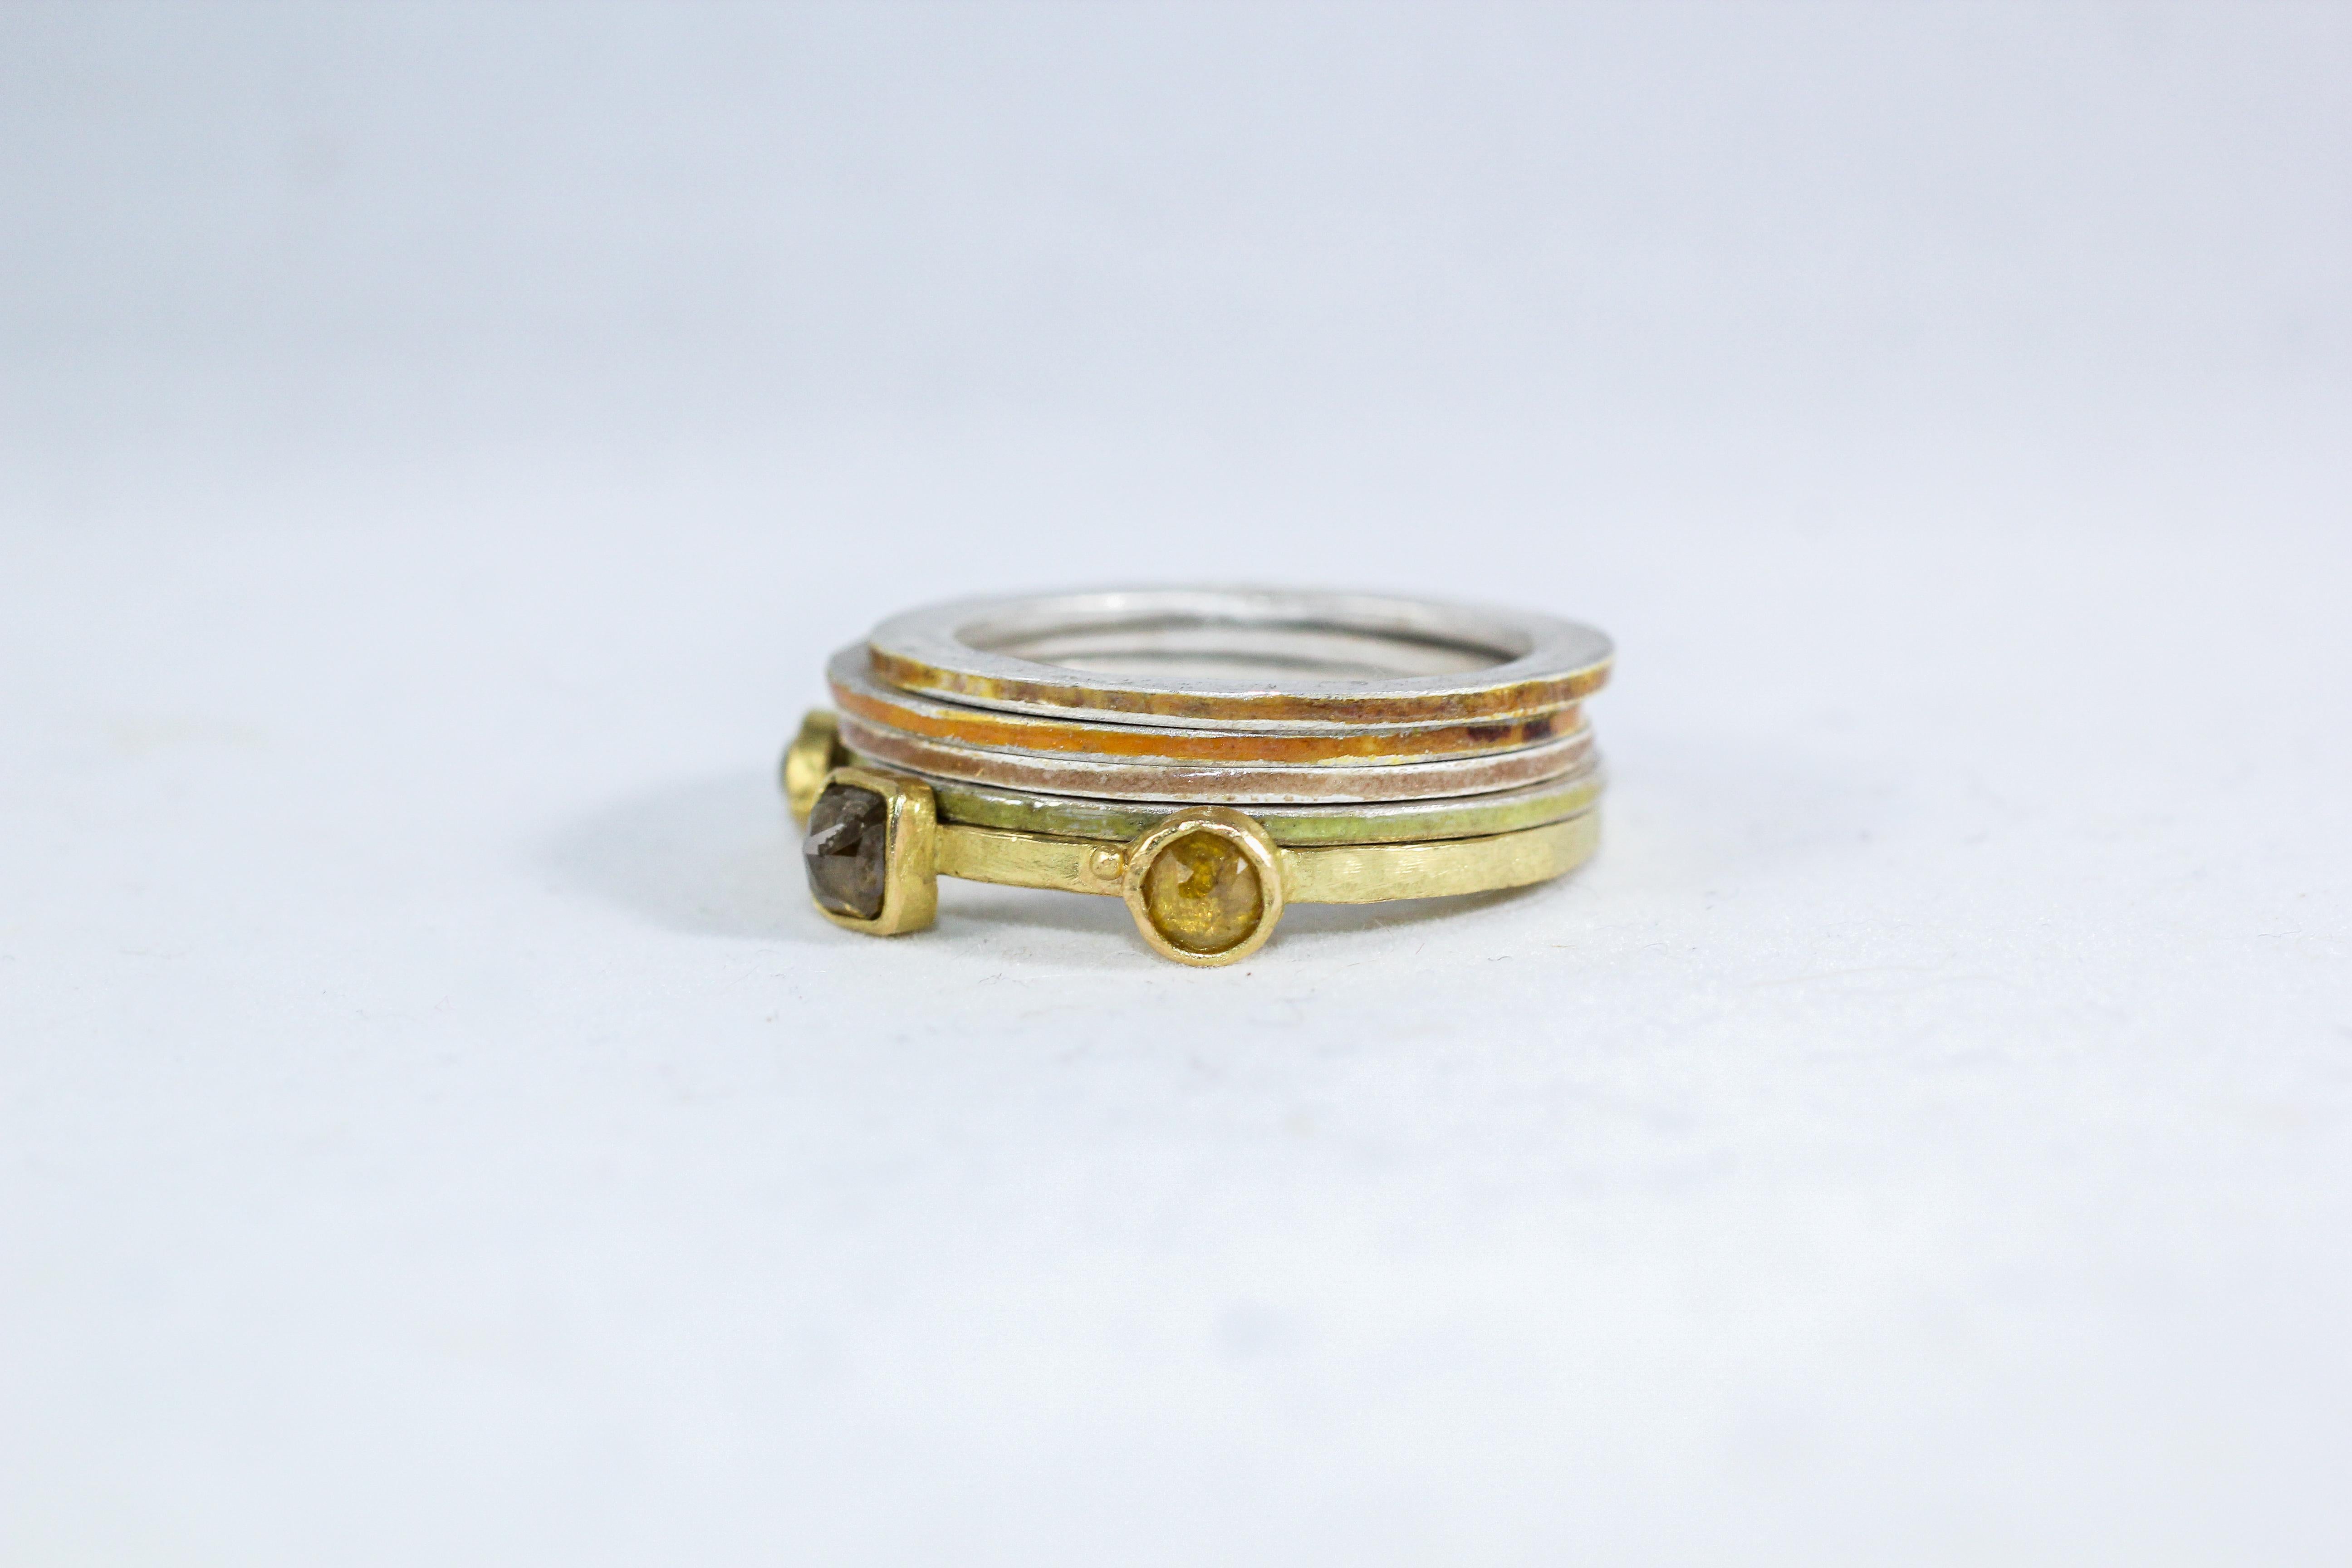 This fashion cocktail stack of bands combines our 18k recycled gold three-stone diamond ring and 4 enameled fine silver rings. Three fancy-colored diamonds are set in bezels. The rich yellow of high-carat gold is complemented by the subtle pastel